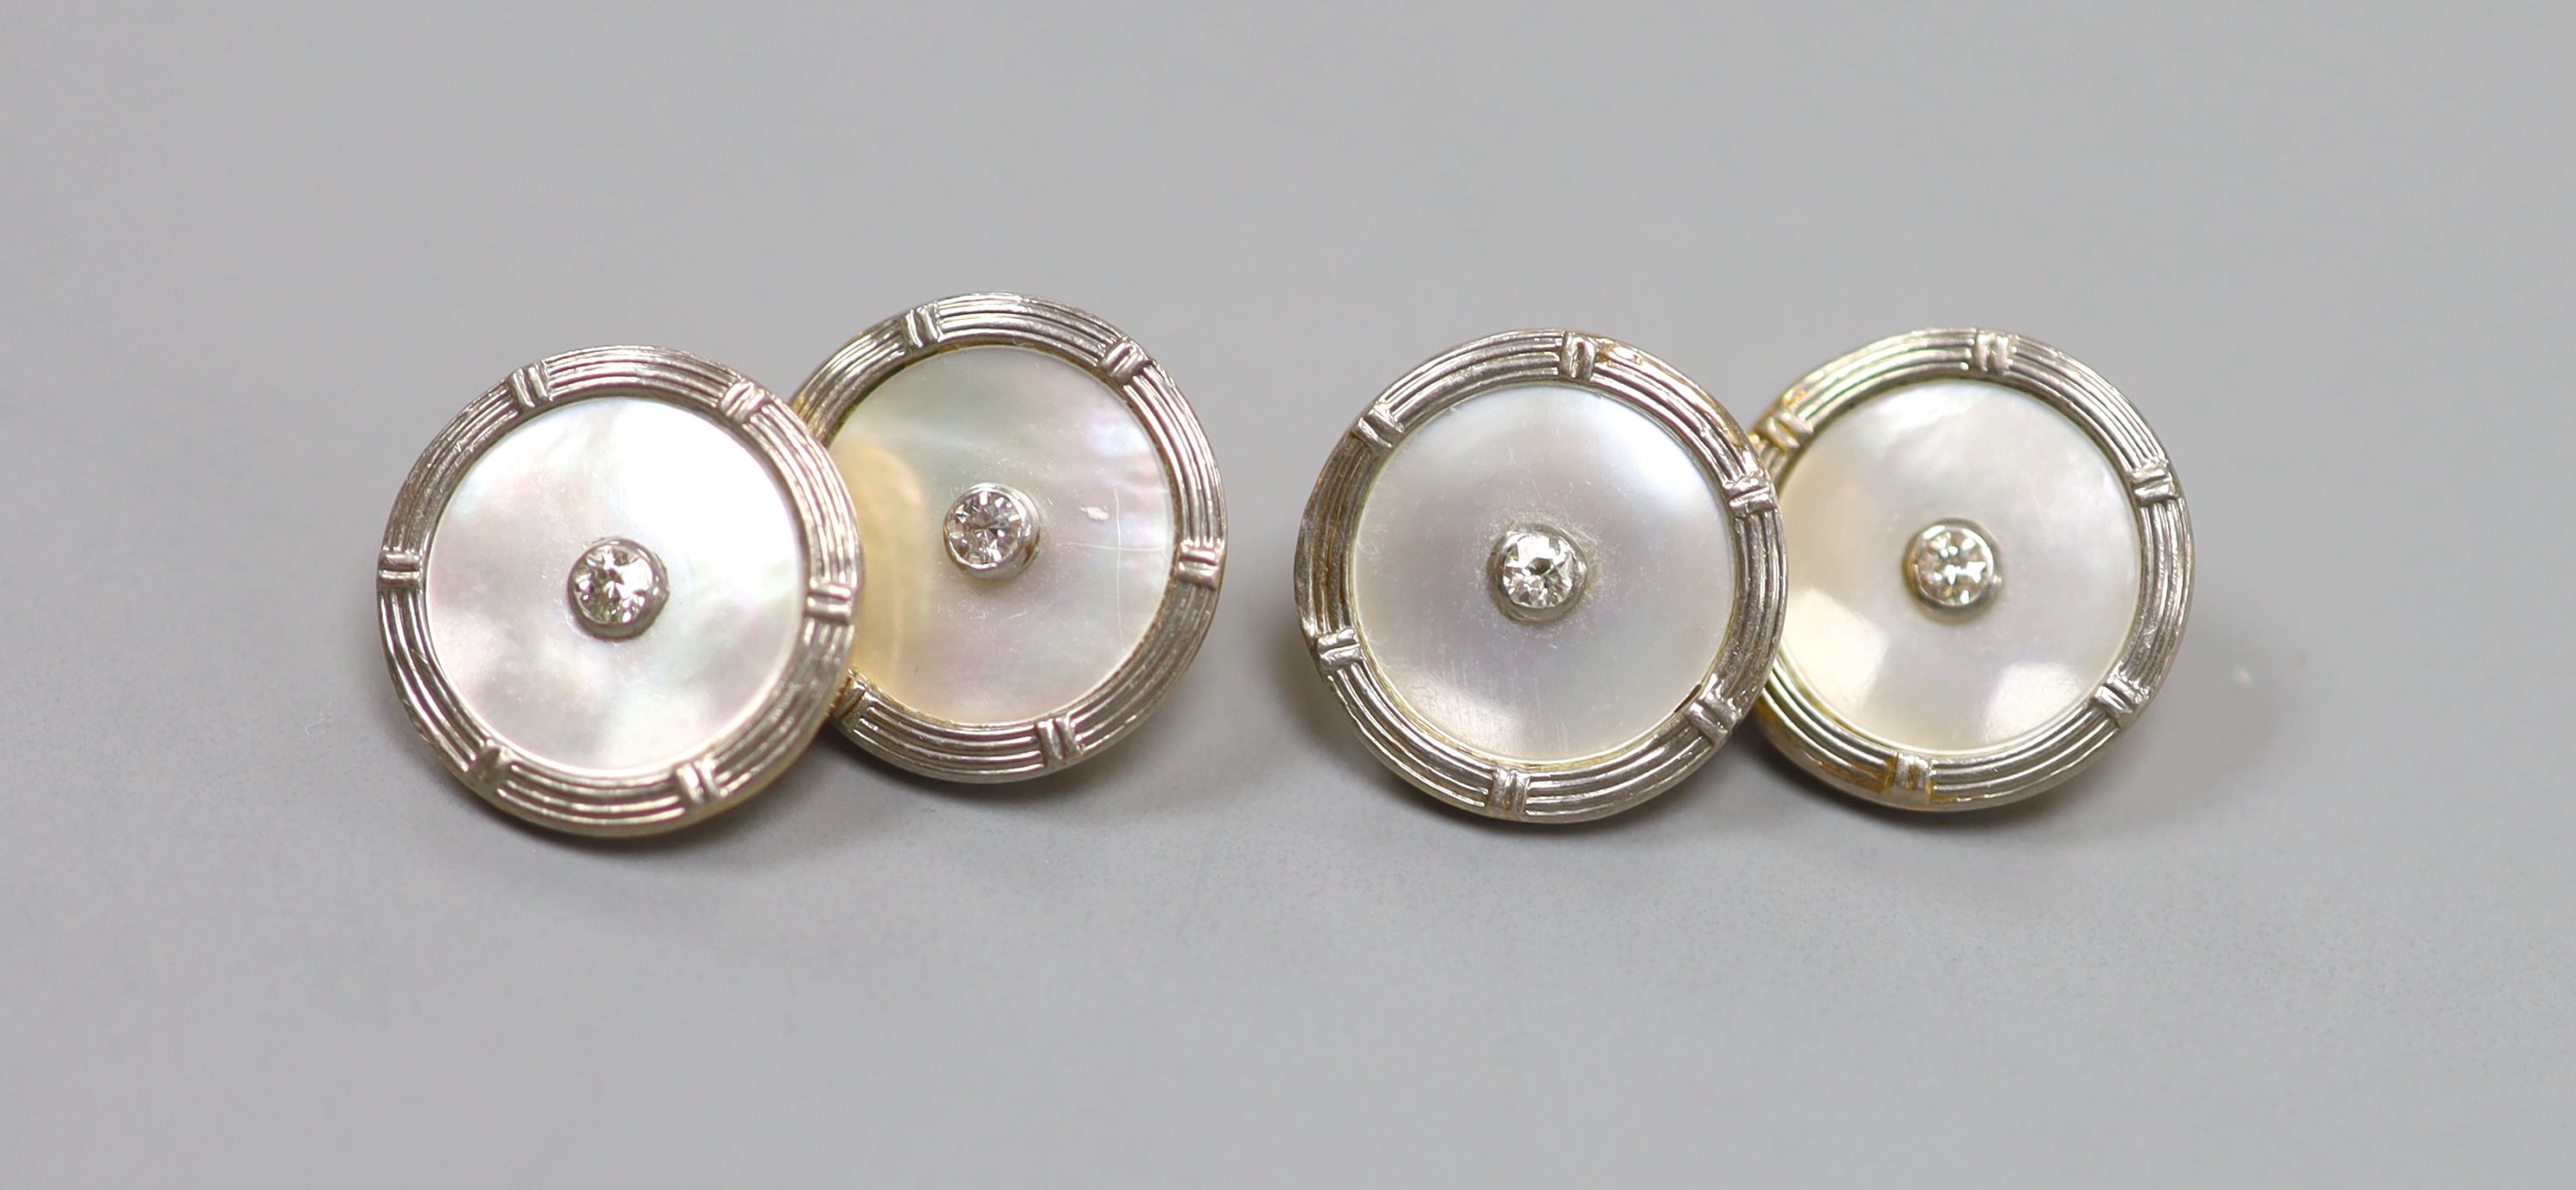 A pair of 18ct, mother of pearl and diamond set disc cufflinks